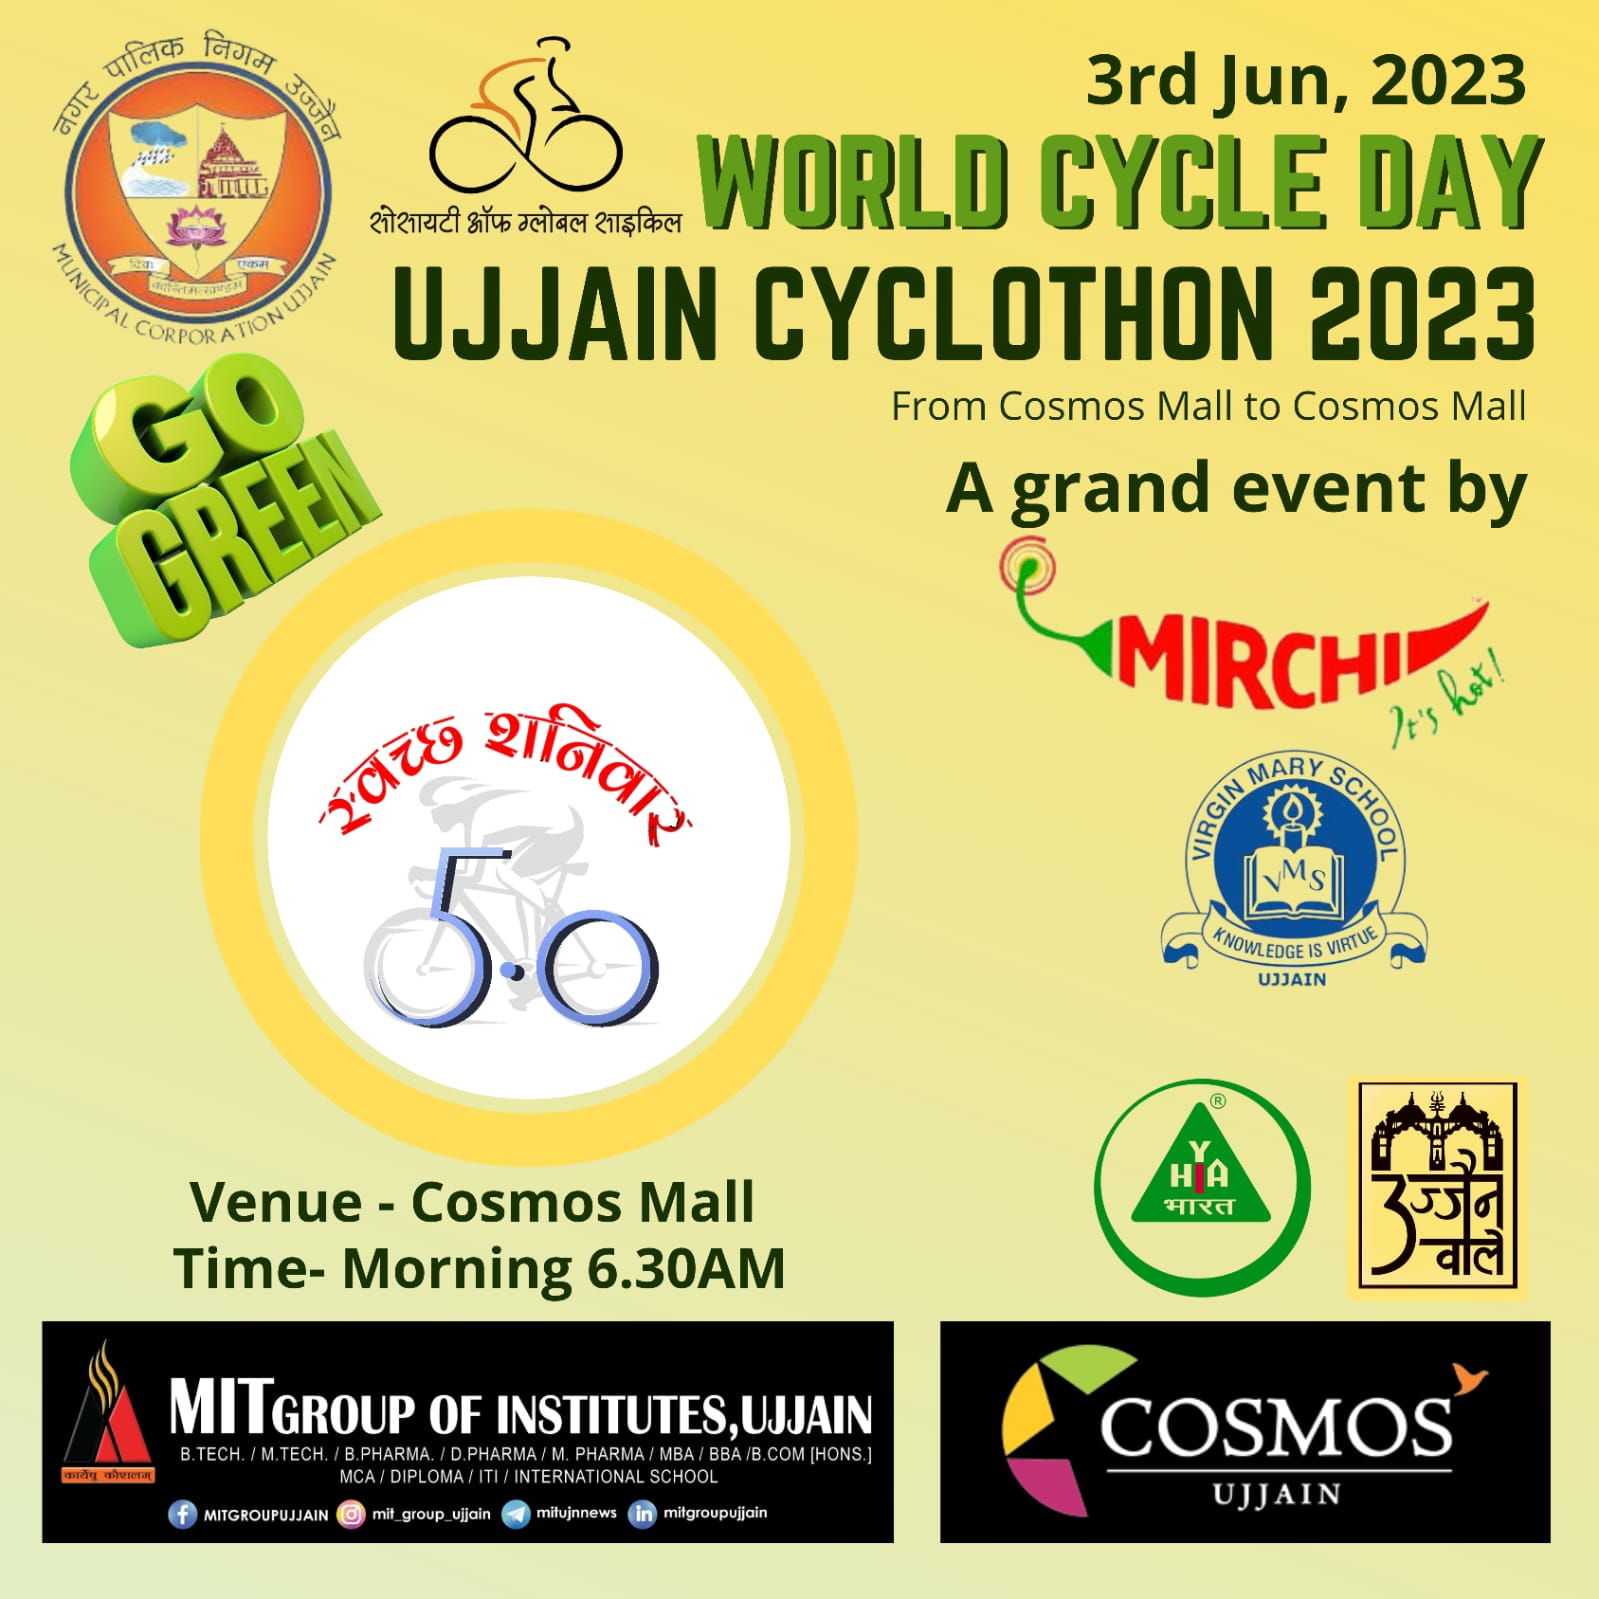 World Cycle Day